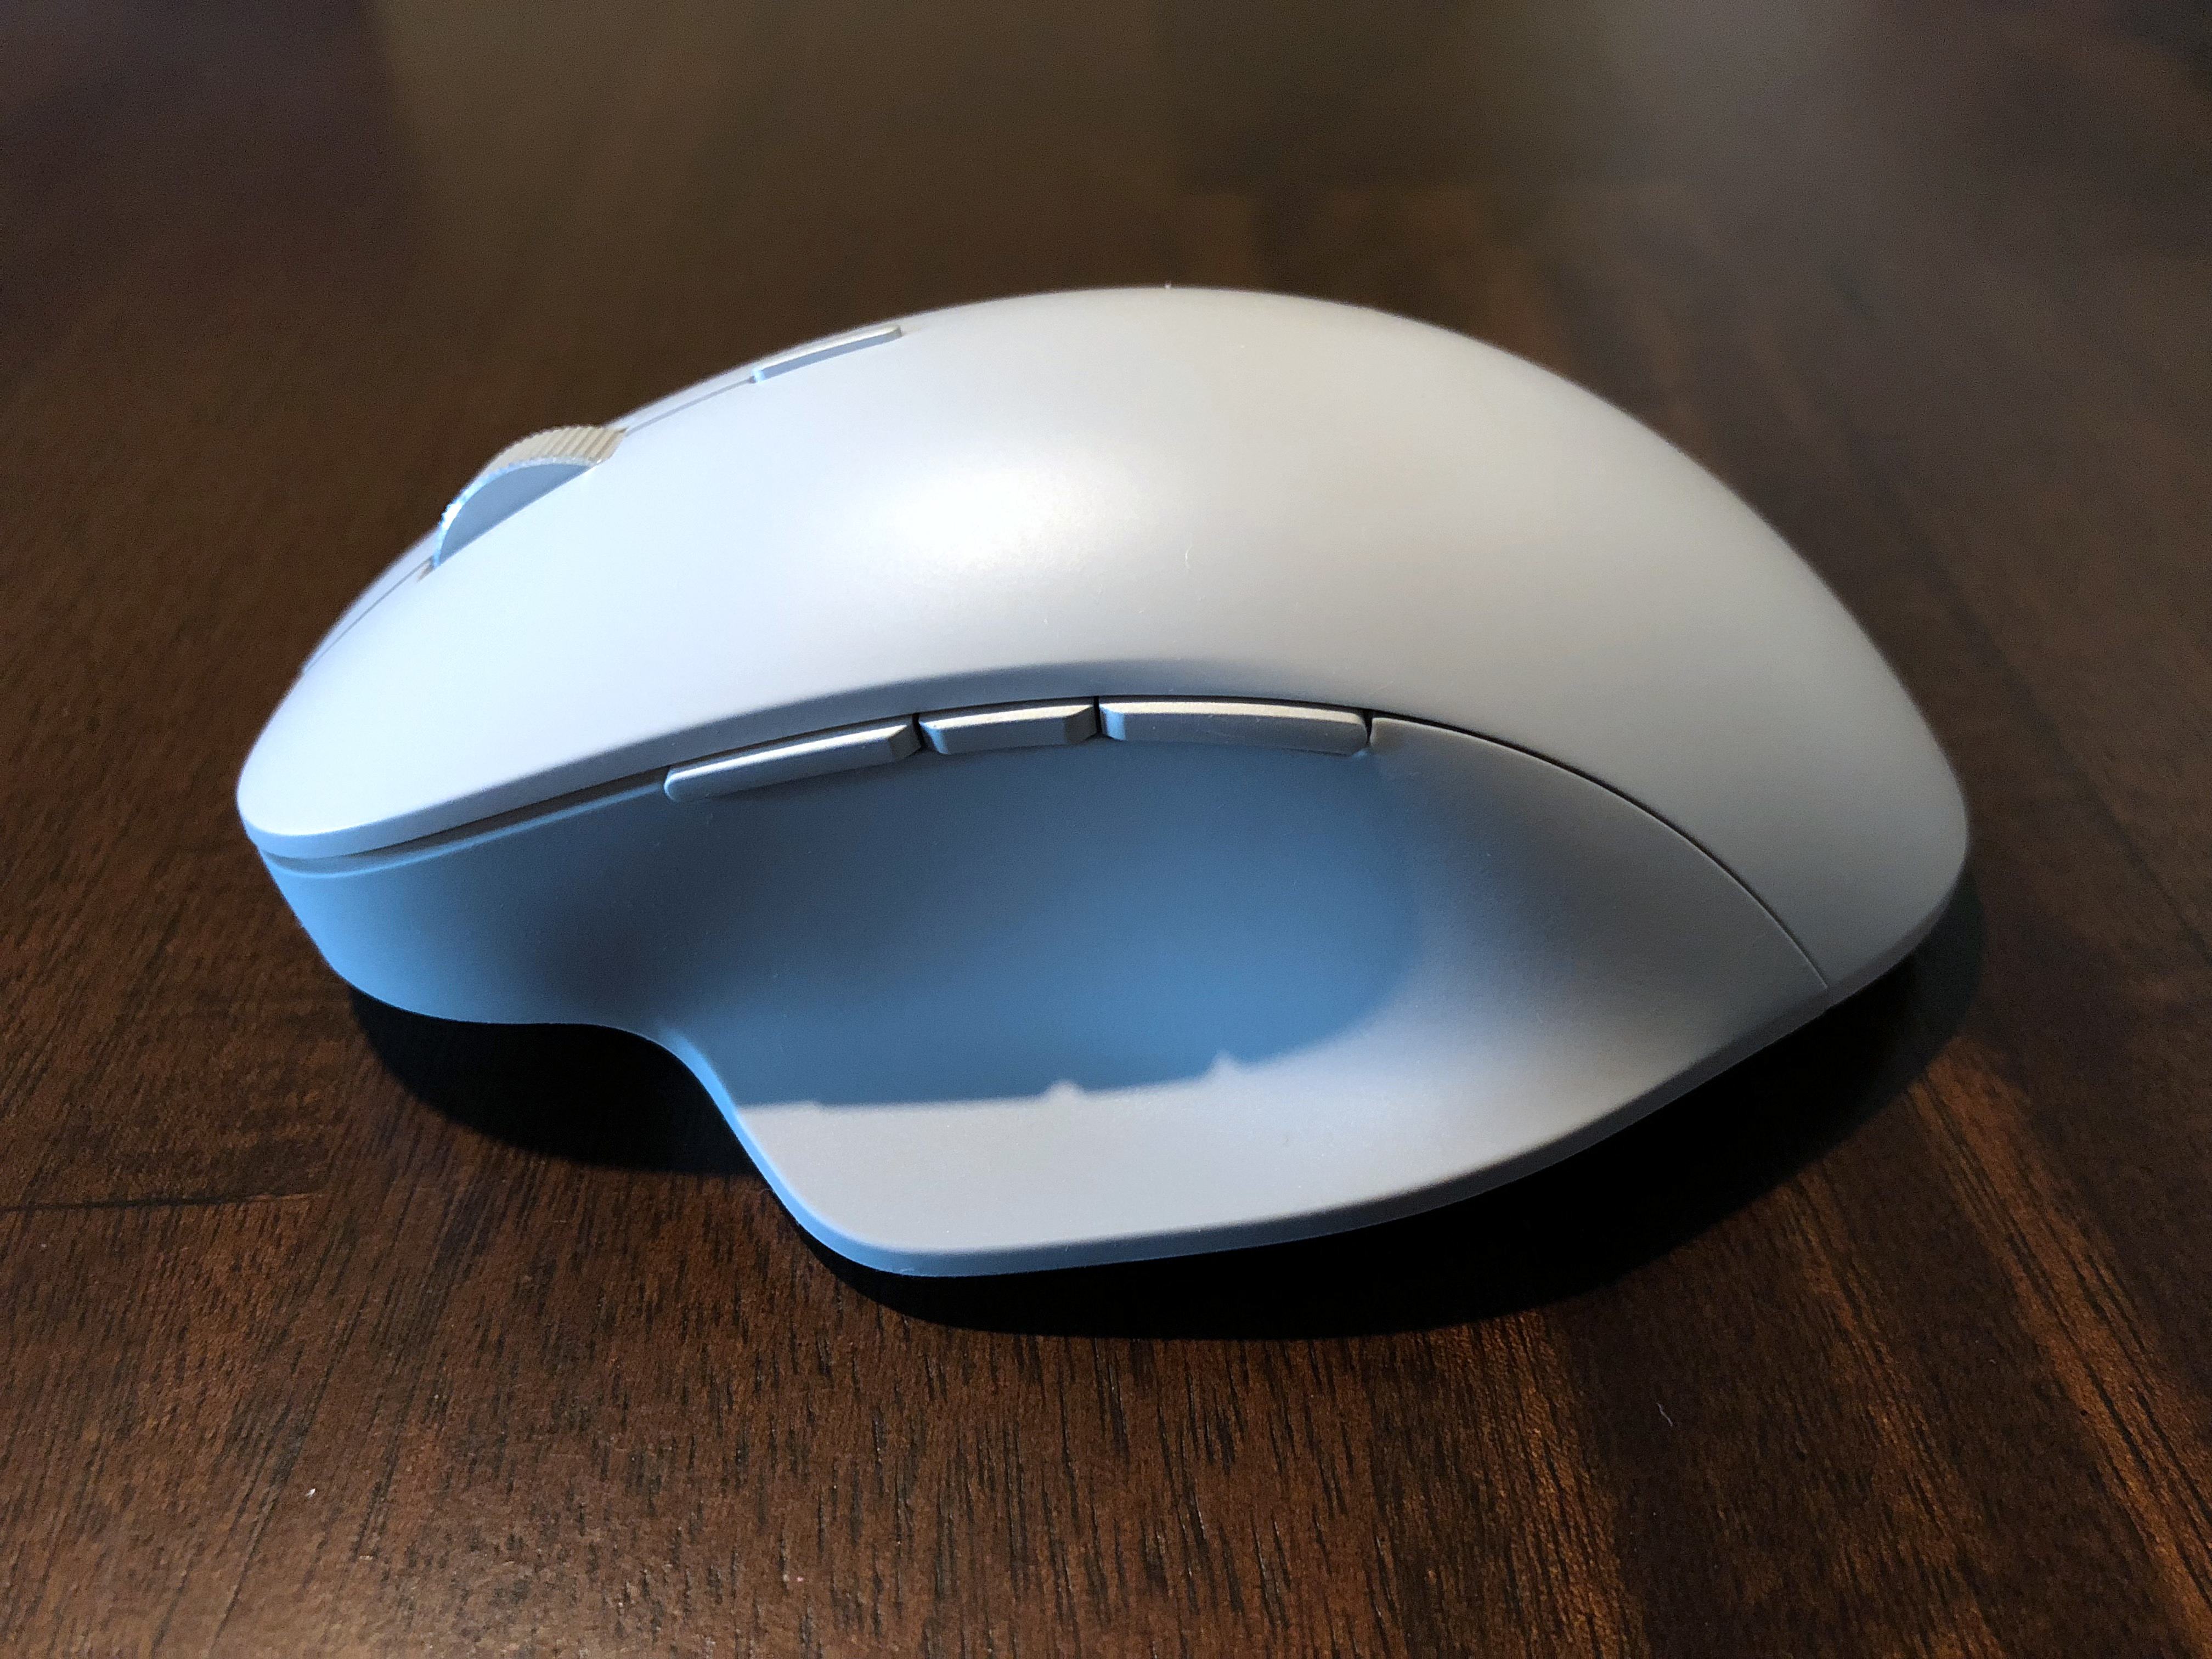 how to connect microsoft arc mouse without dongle